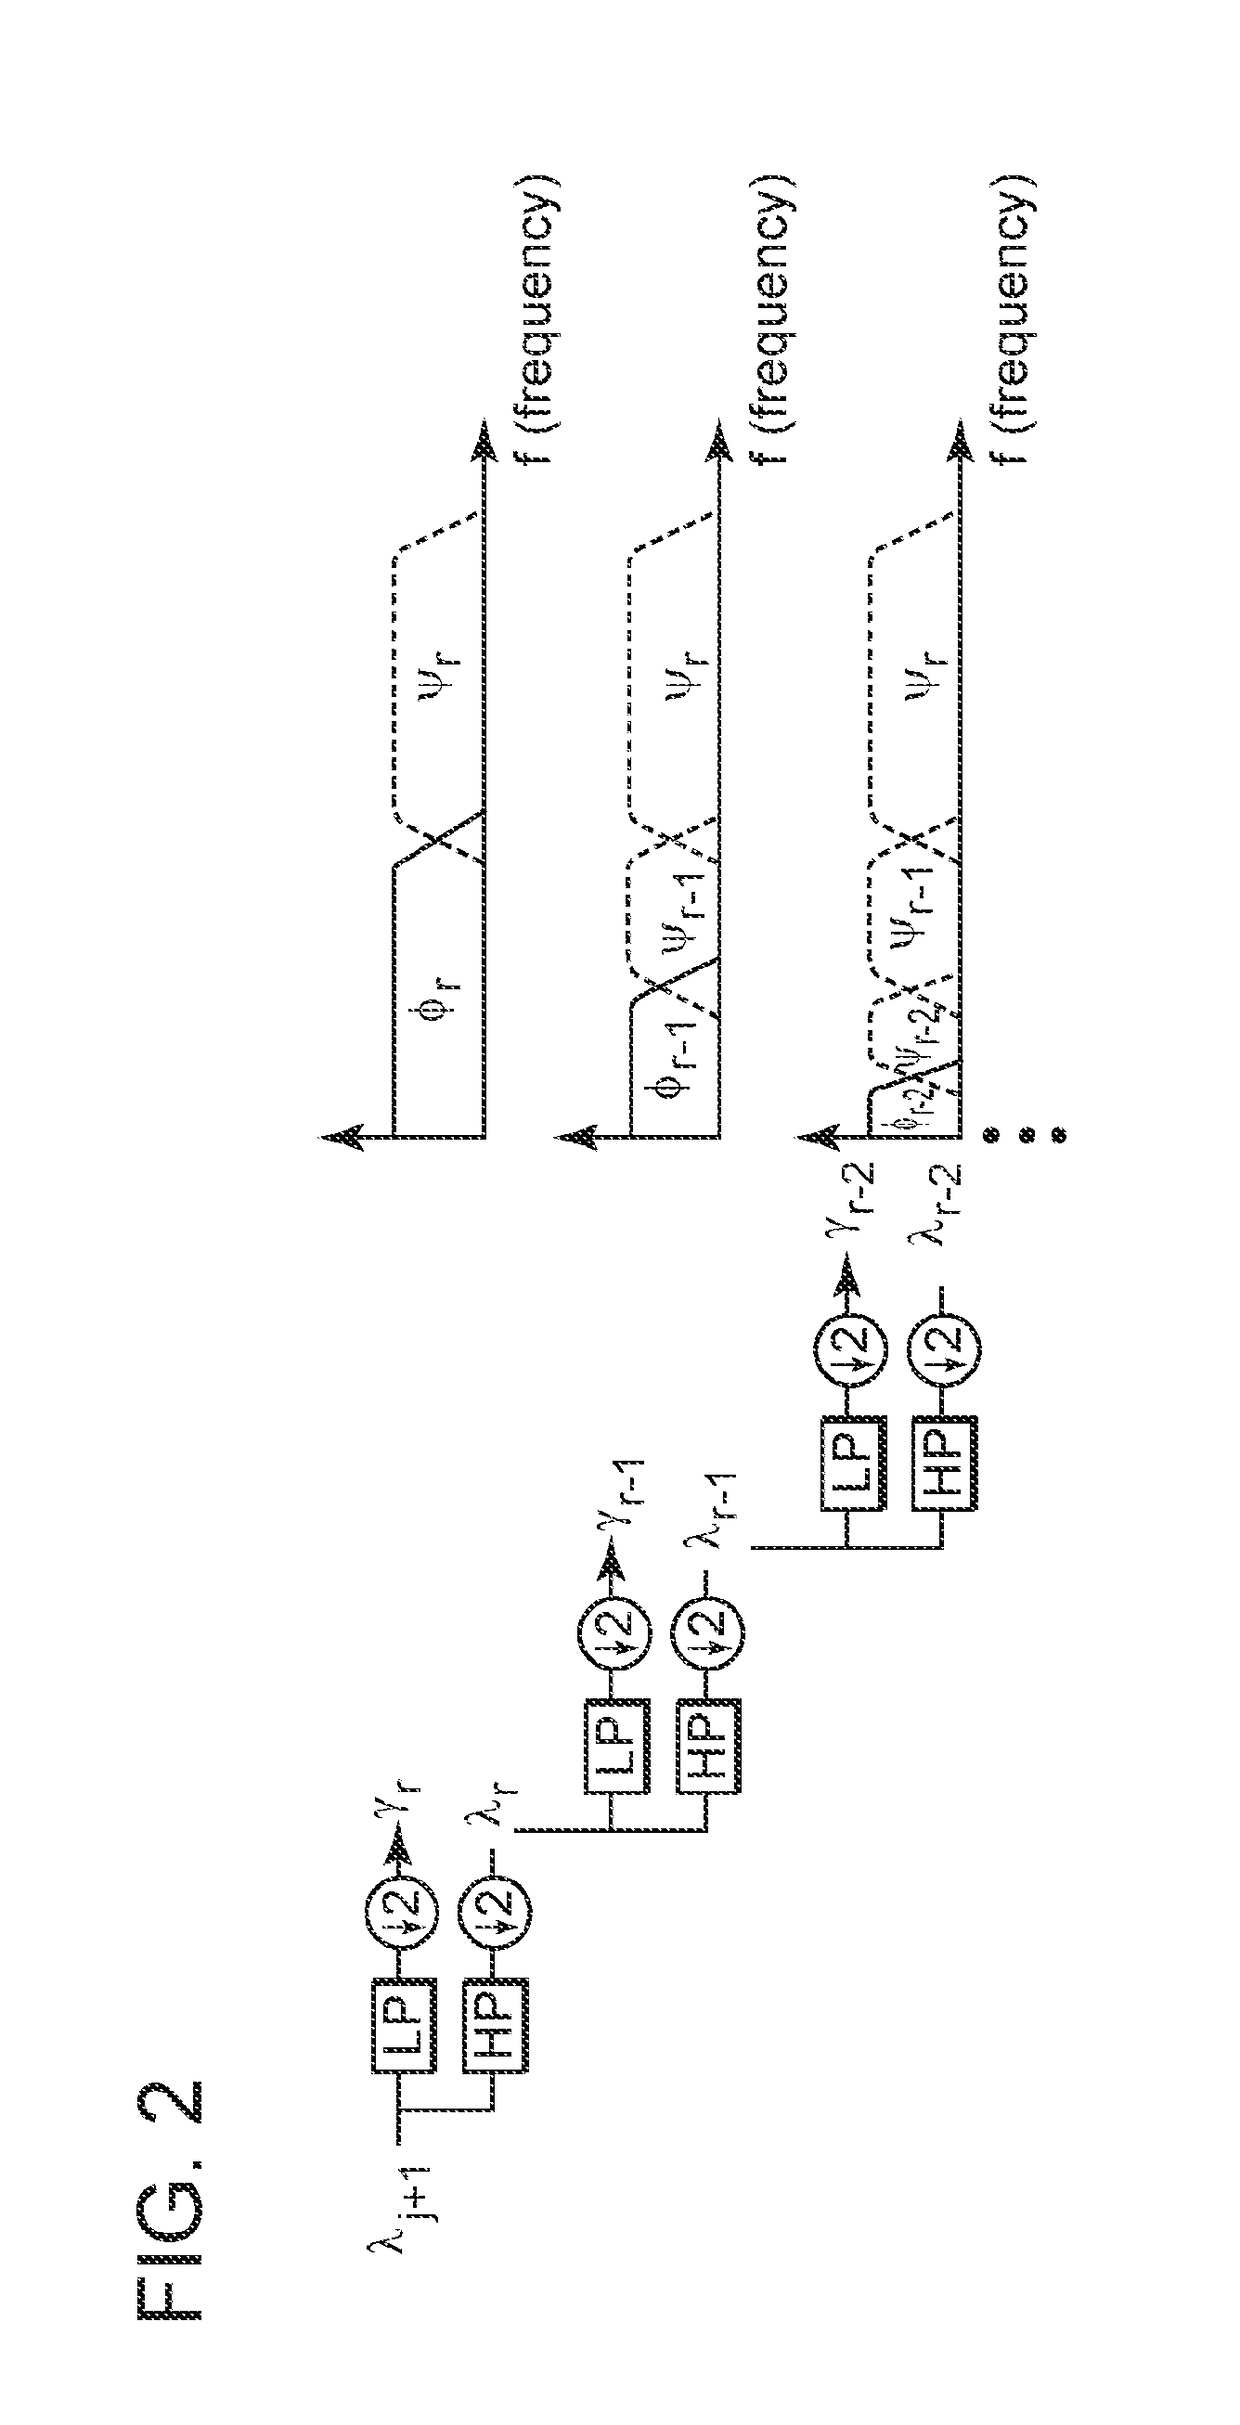 Ensemble-based multi-scale history-matching device and method for reservoir characterization